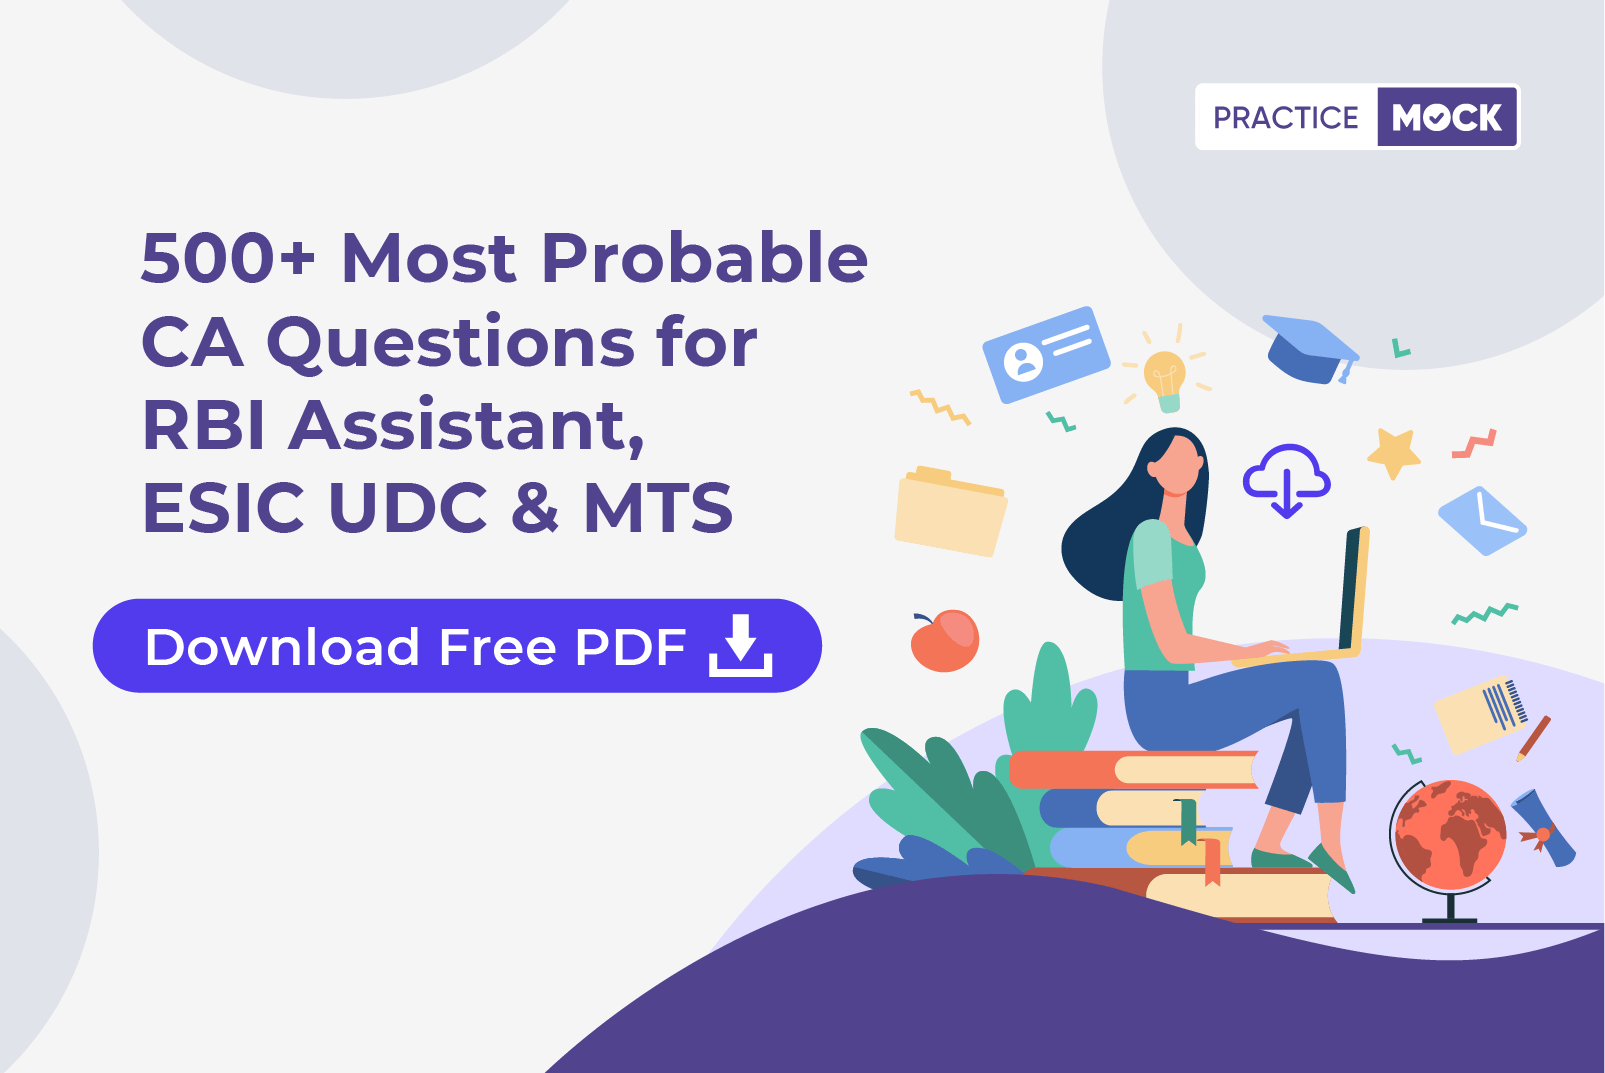 500+ Most Probable CA Questions for RBI Assistant, ESIC UDC & MTS- Download Free PDF